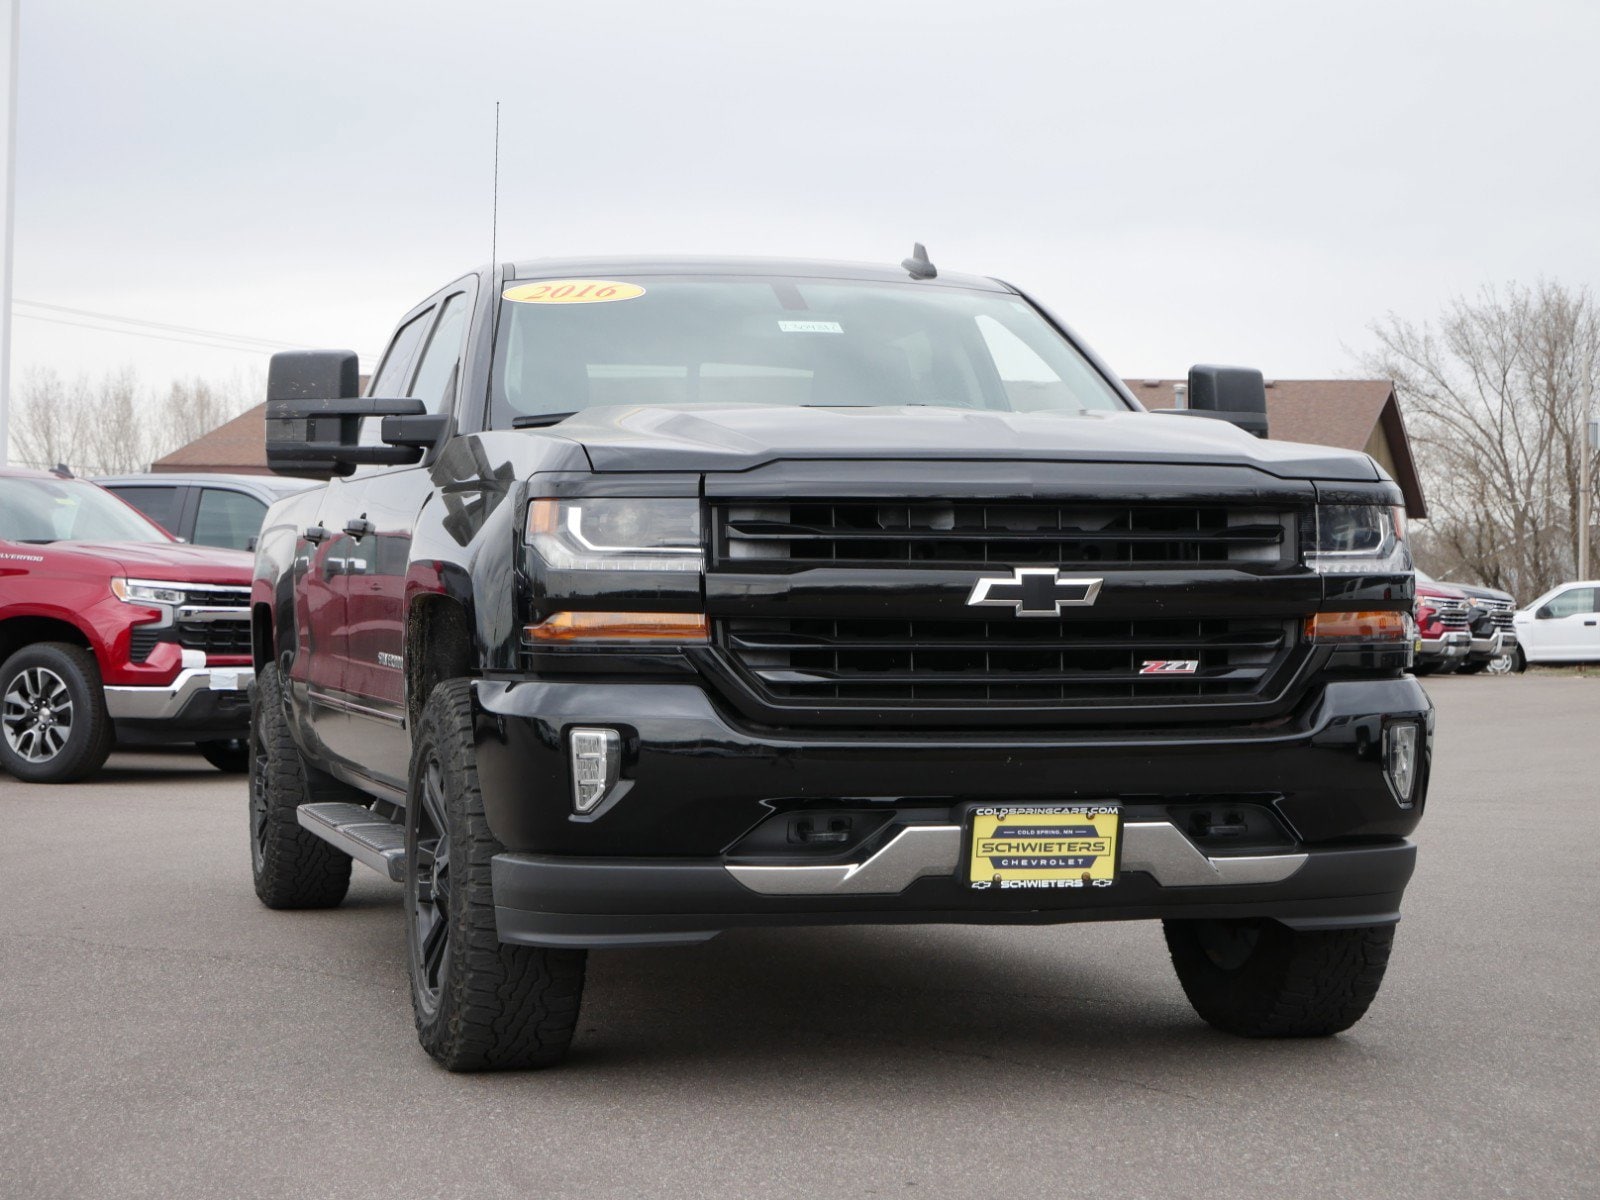 Used 2016 Chevrolet Silverado 1500 LT with VIN 3GCUKREC6GG249766 for sale in Cold Spring, Minnesota